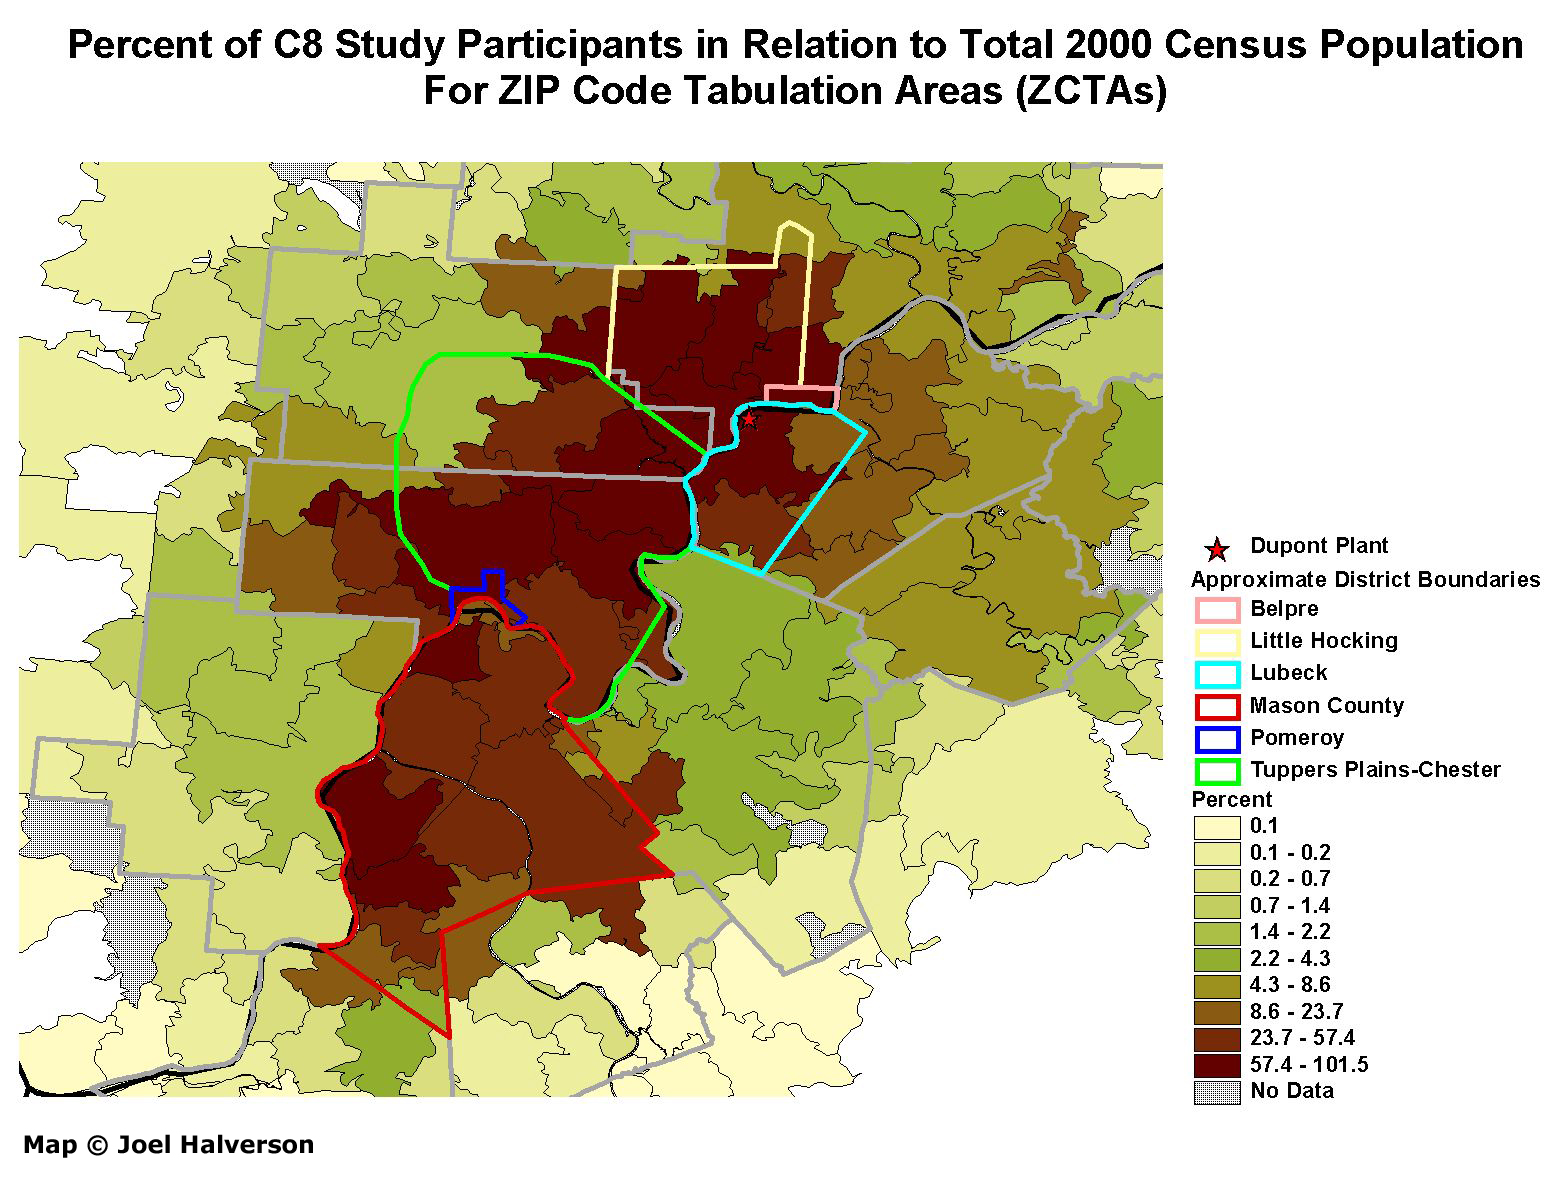 Percent of C8 Study Participants in Relation to Total 2000 Census Population